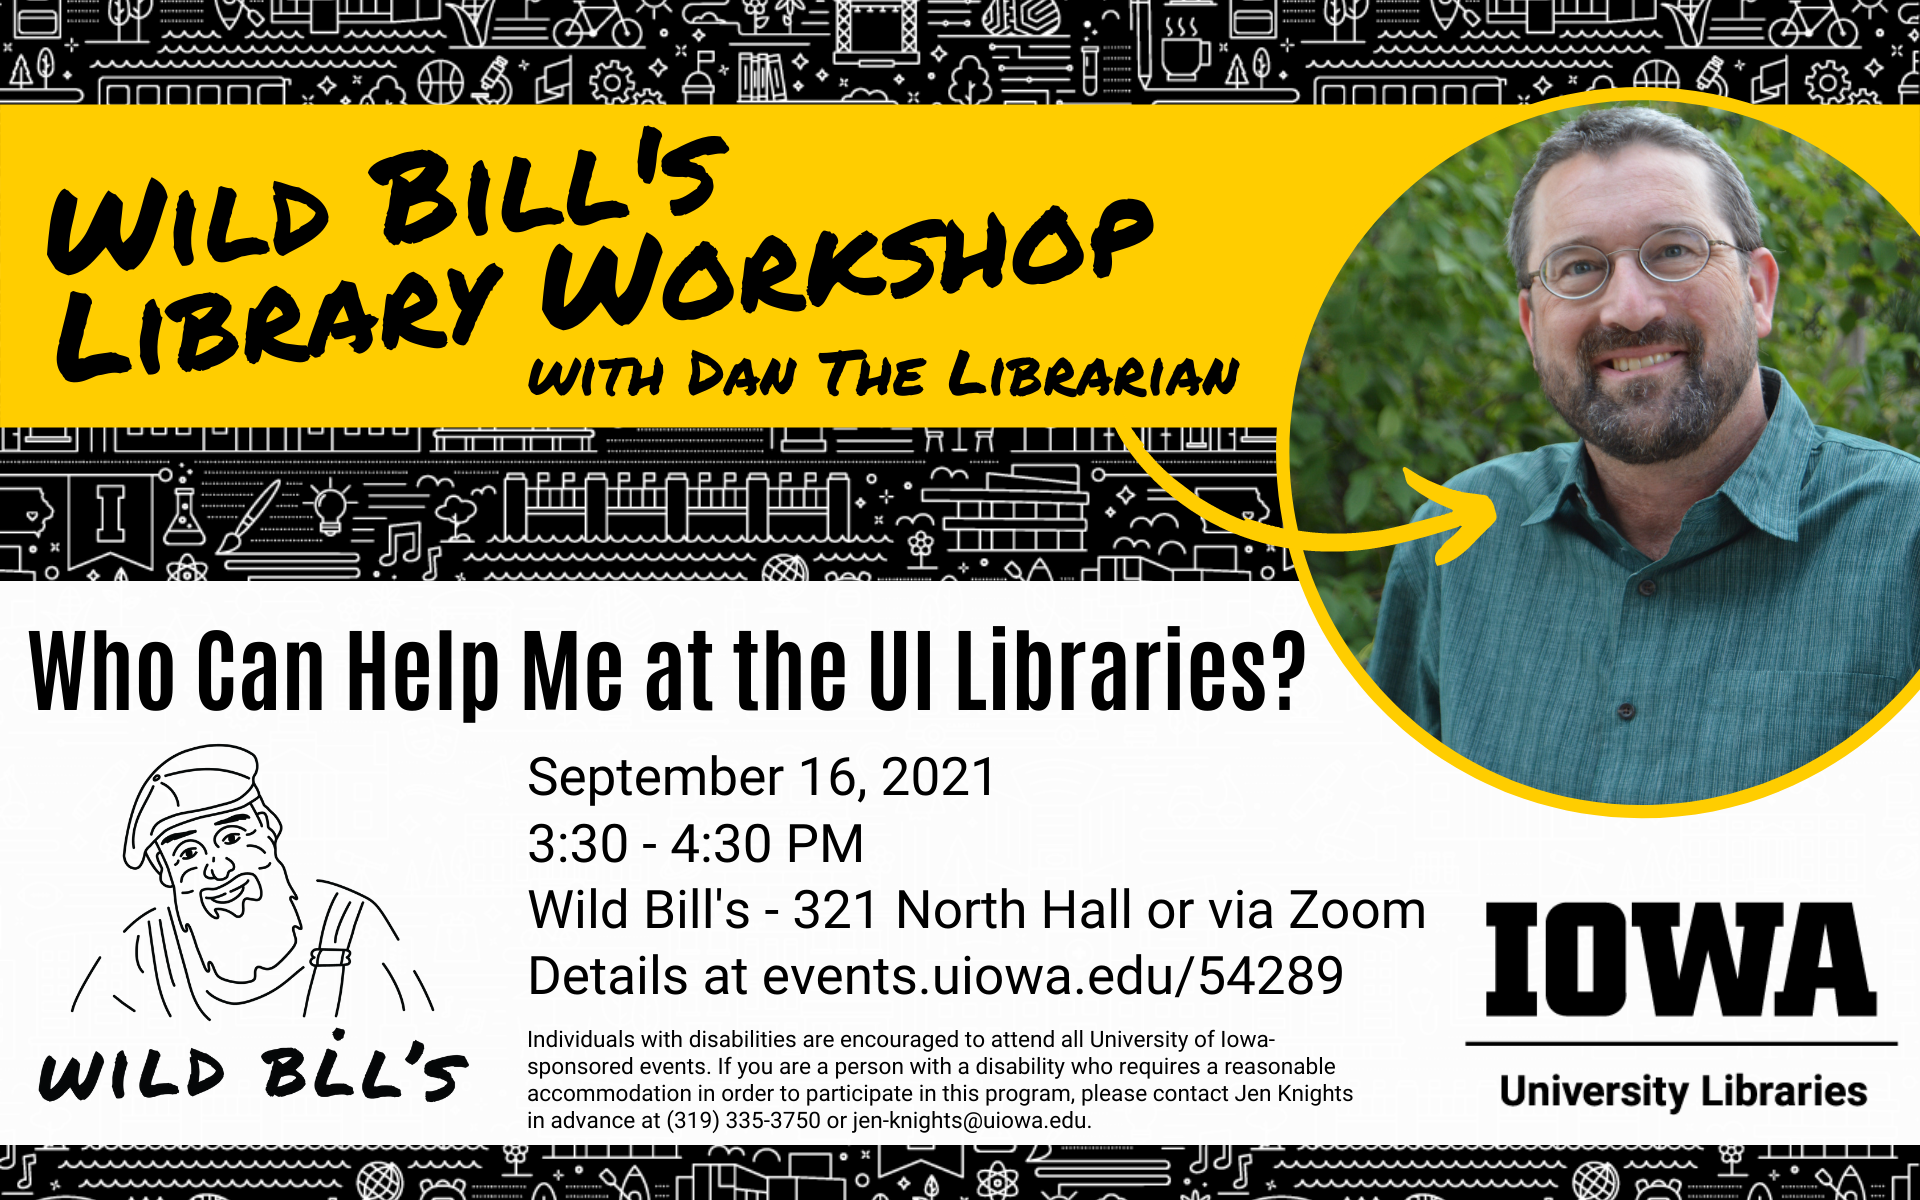 Who can help me at UI Libraries? Workshop at Wild Bill's Sept. 16, 2021